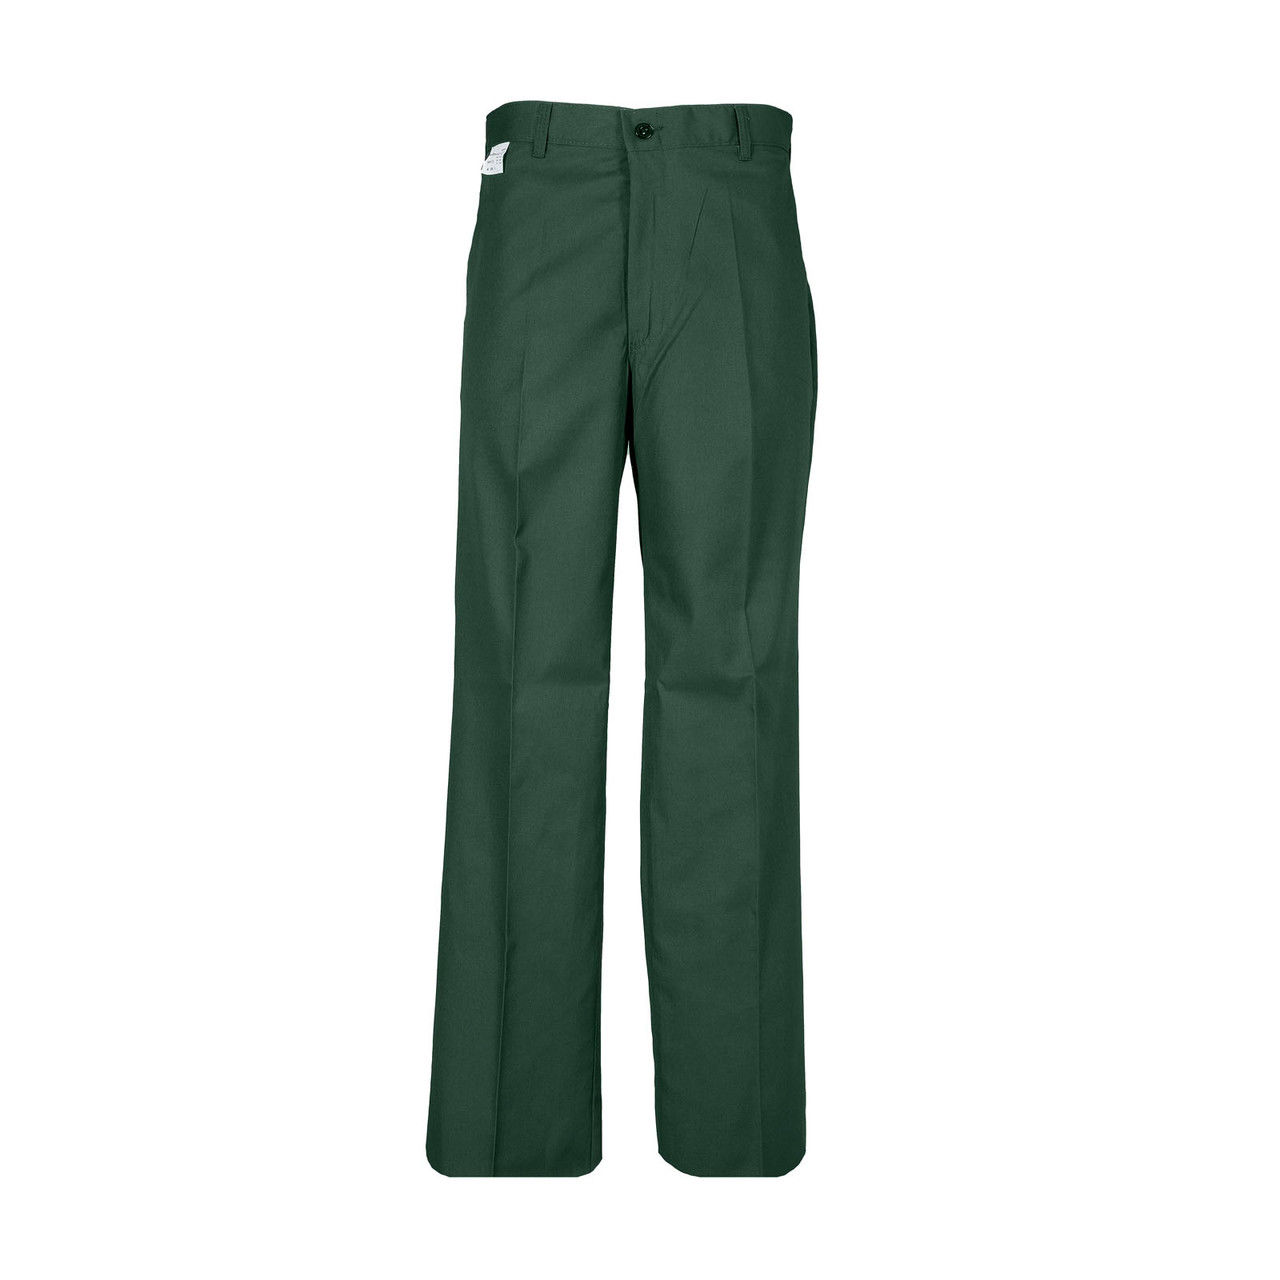 How long for shipping green work pants from Pennsylvania?